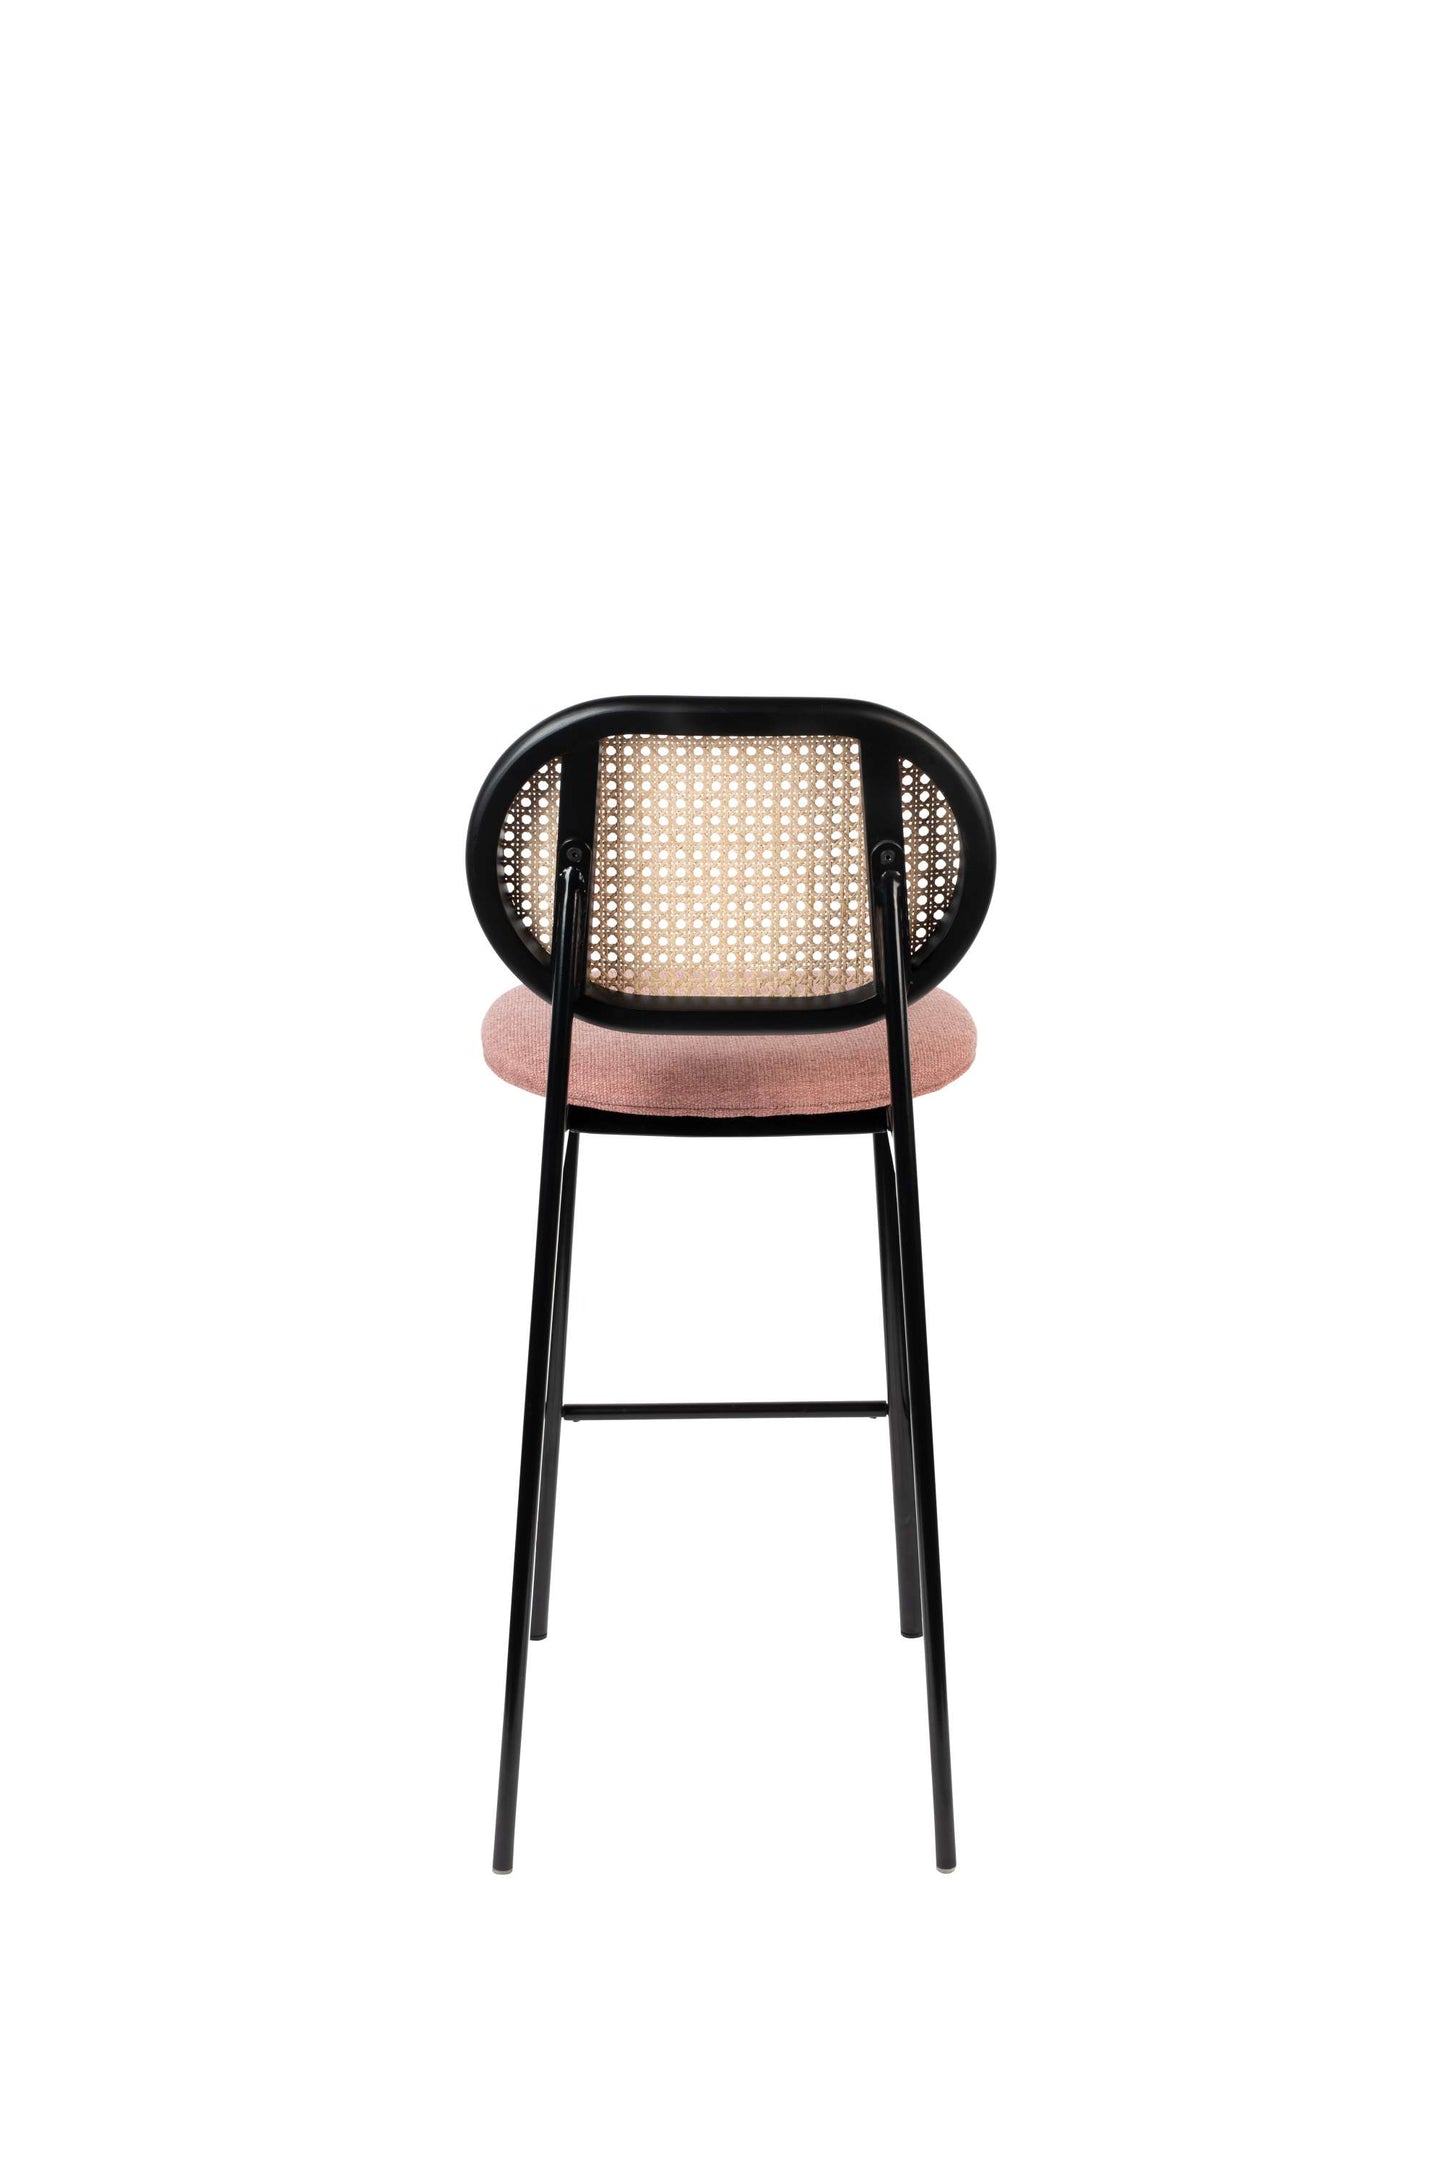 Zuiver | COUNTER STOOL SPIKE NATURAL/PINK Default Title